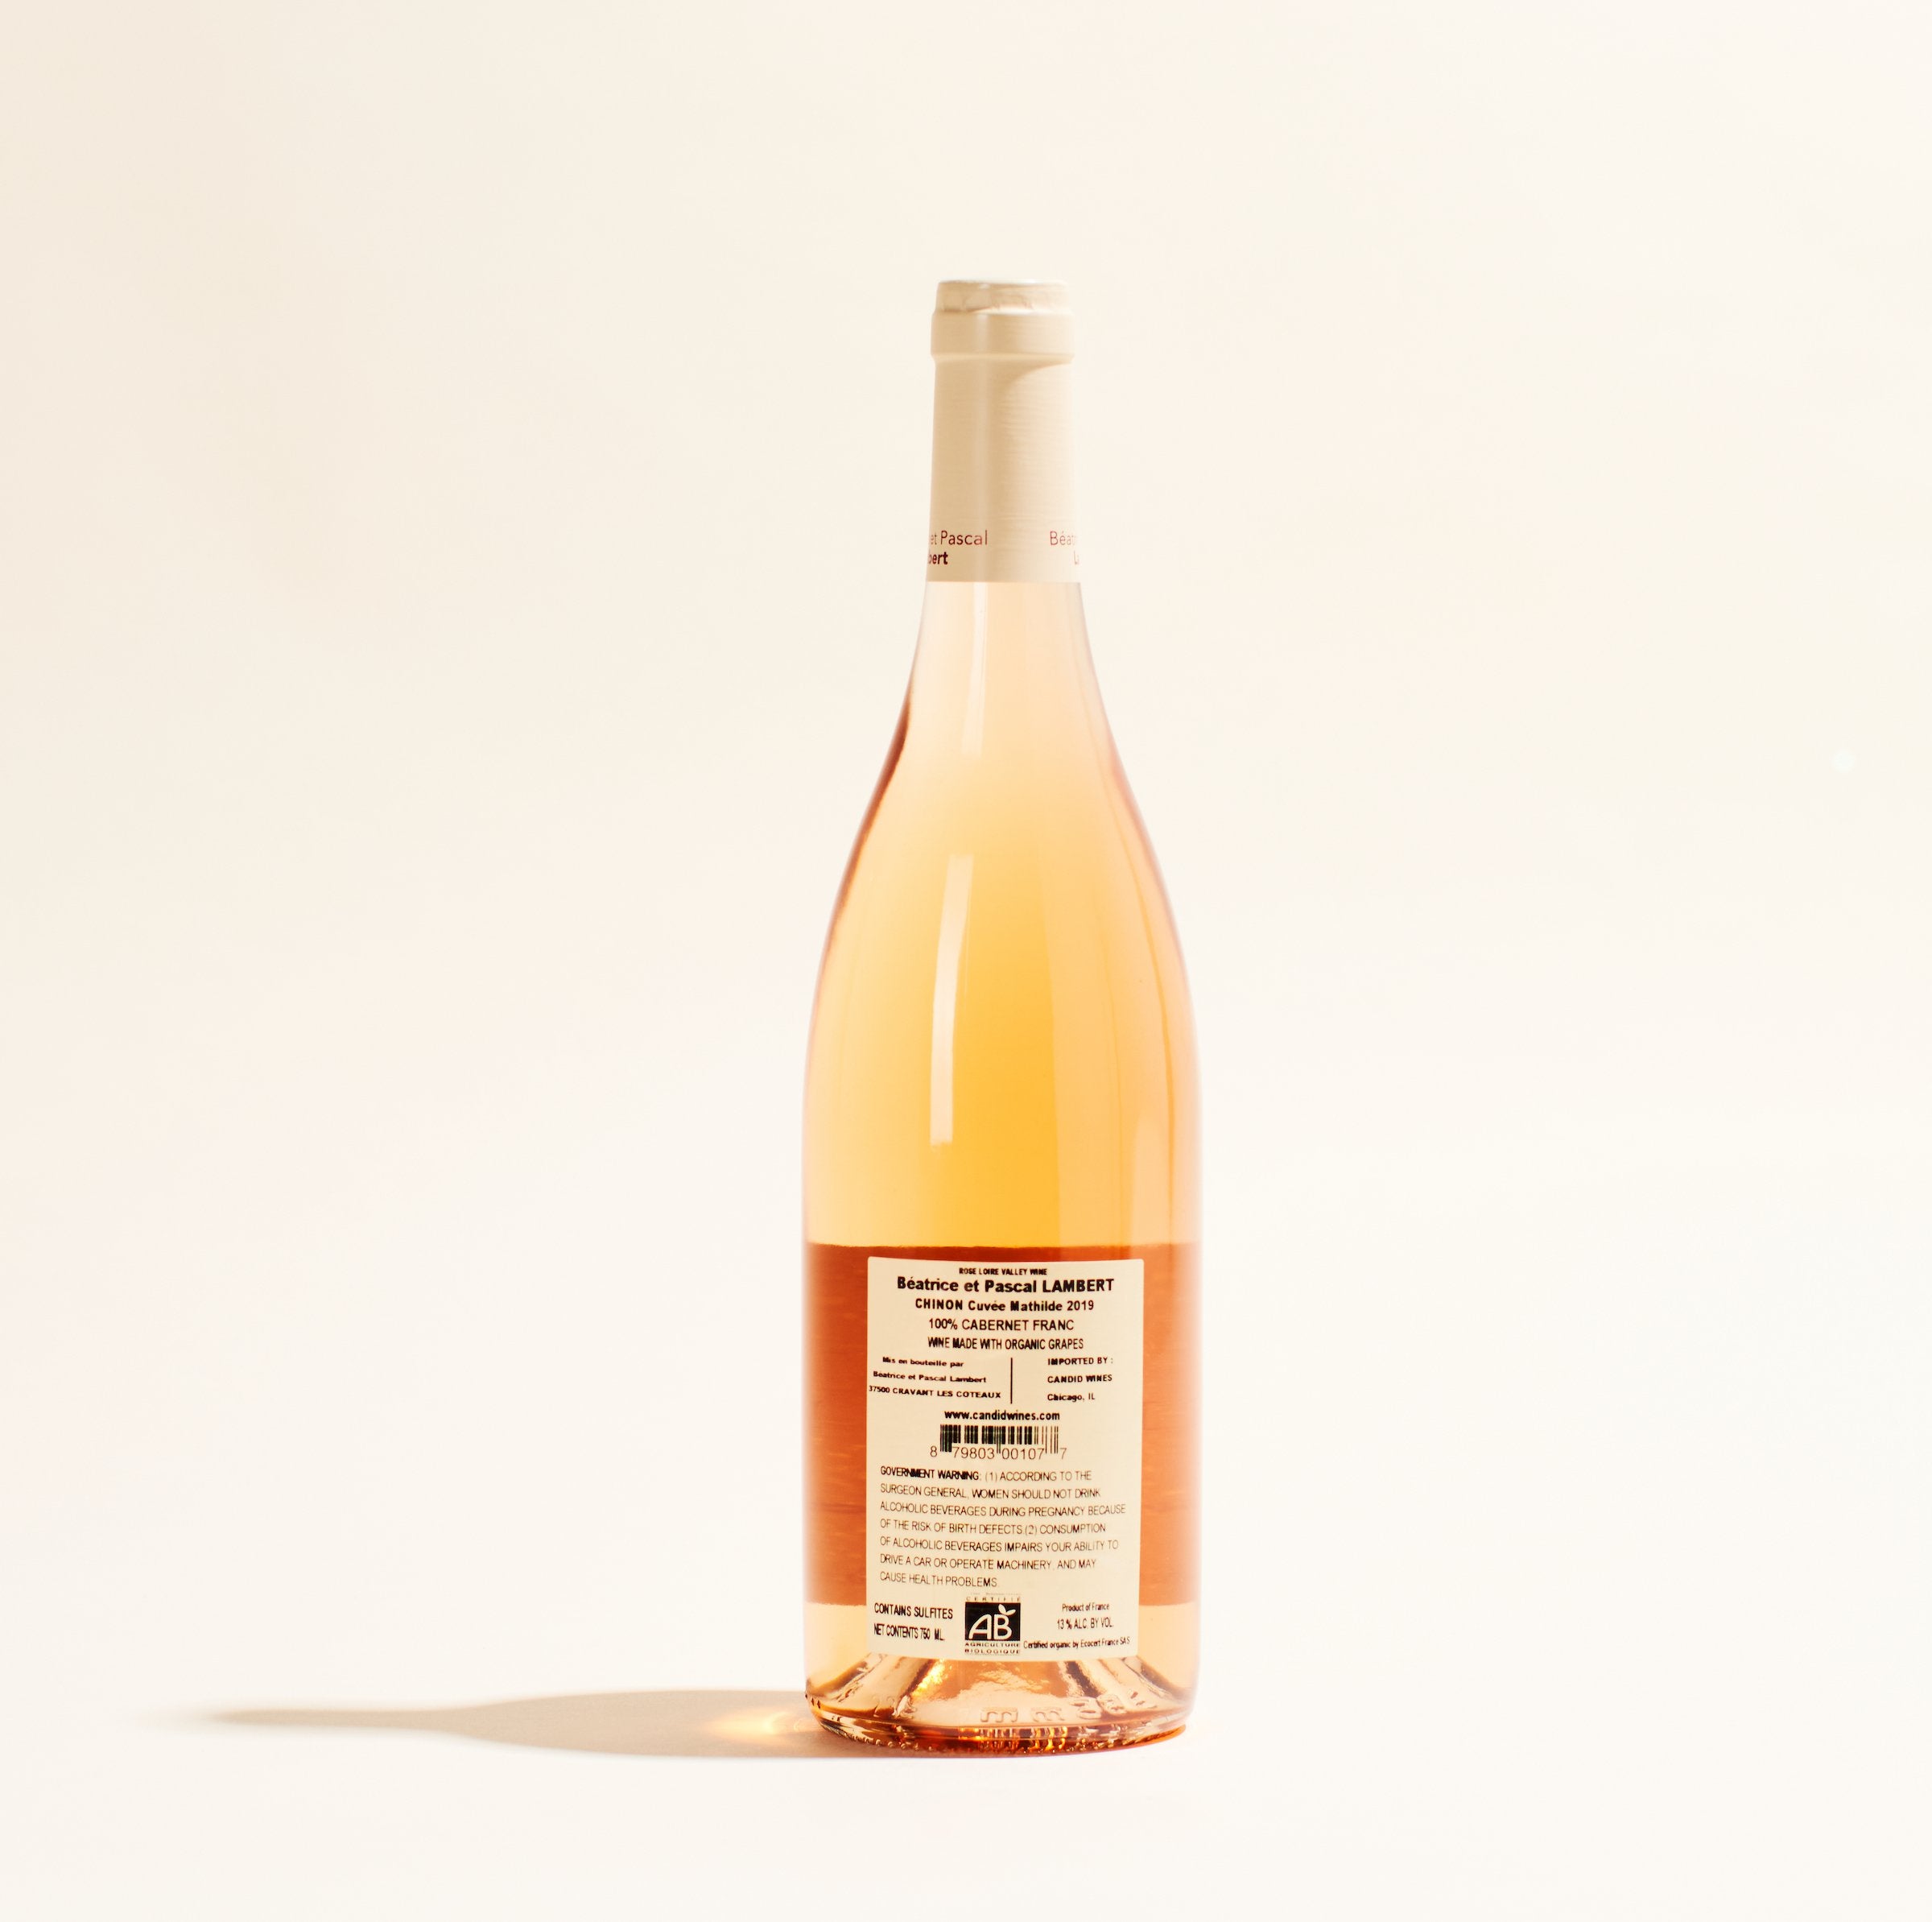 chinon rose cuvee mathilde domaine beatrice and pascal lambert natural Rose wine Loire Valley France back